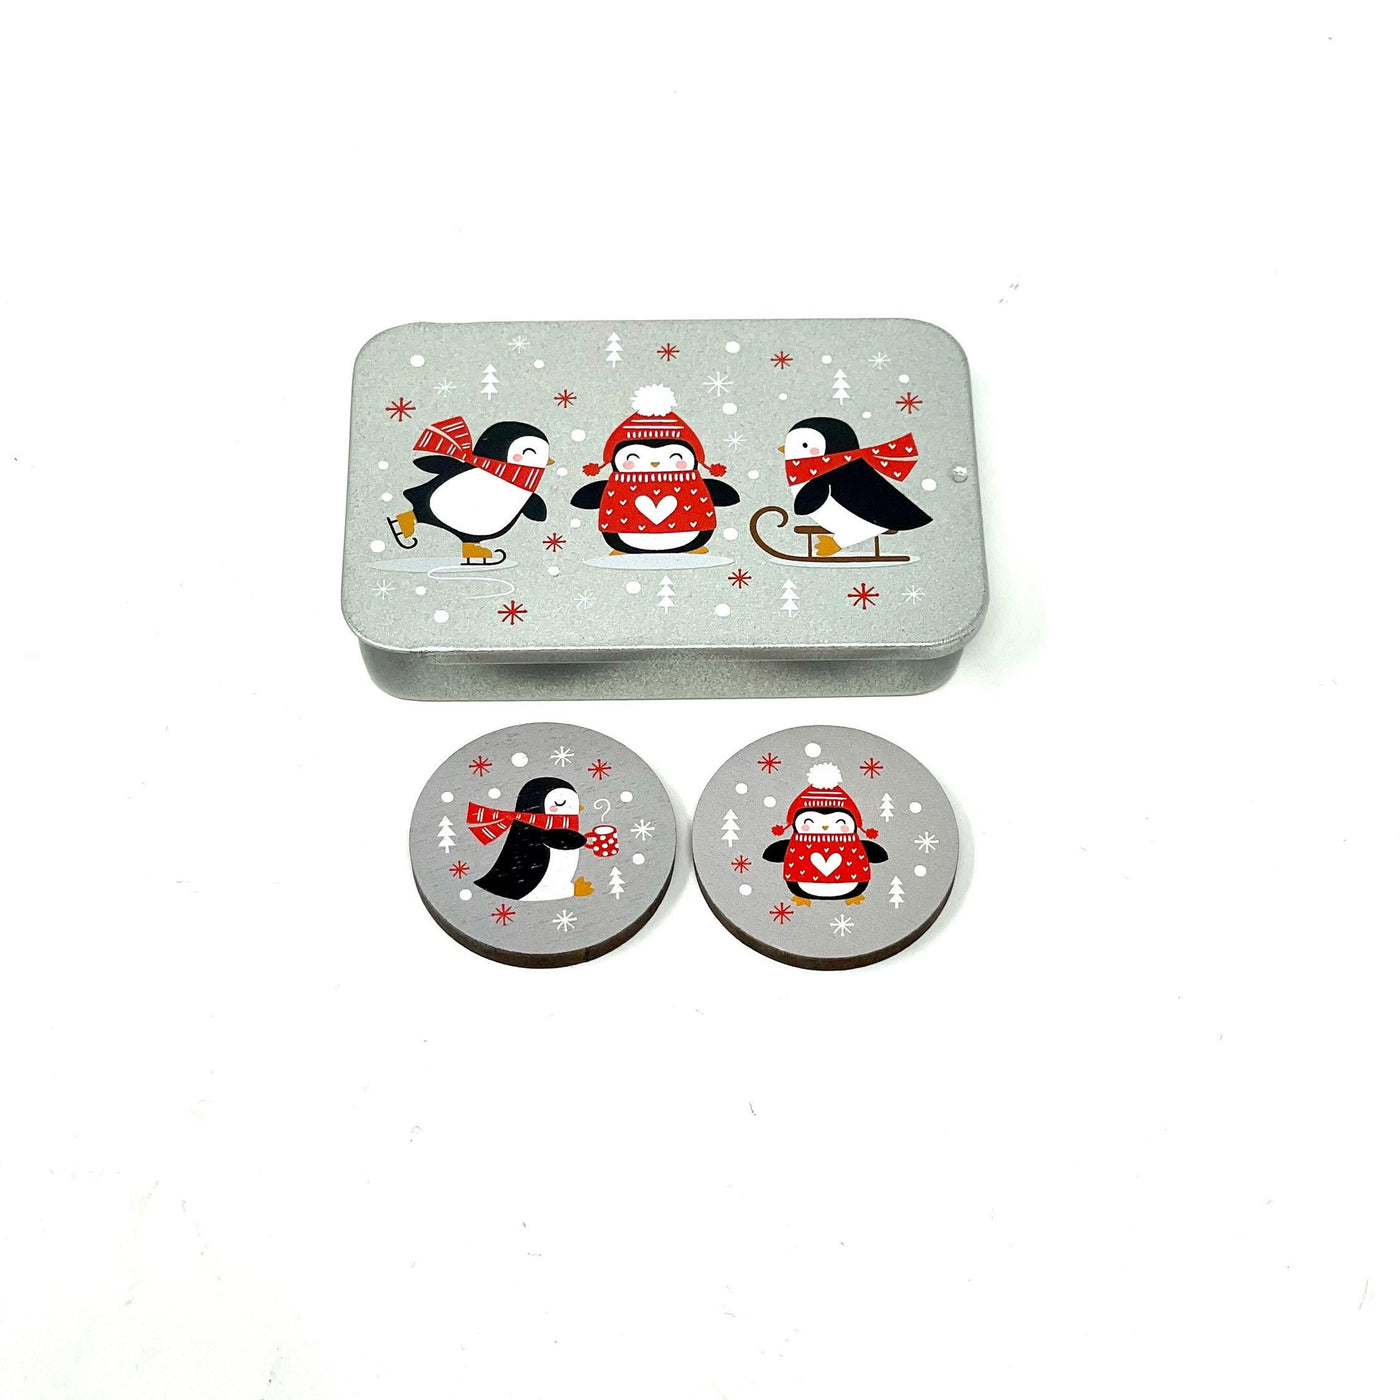 Reversible Penguin Needle Minder Magnet with tin - Cross stitch / embroidery gift